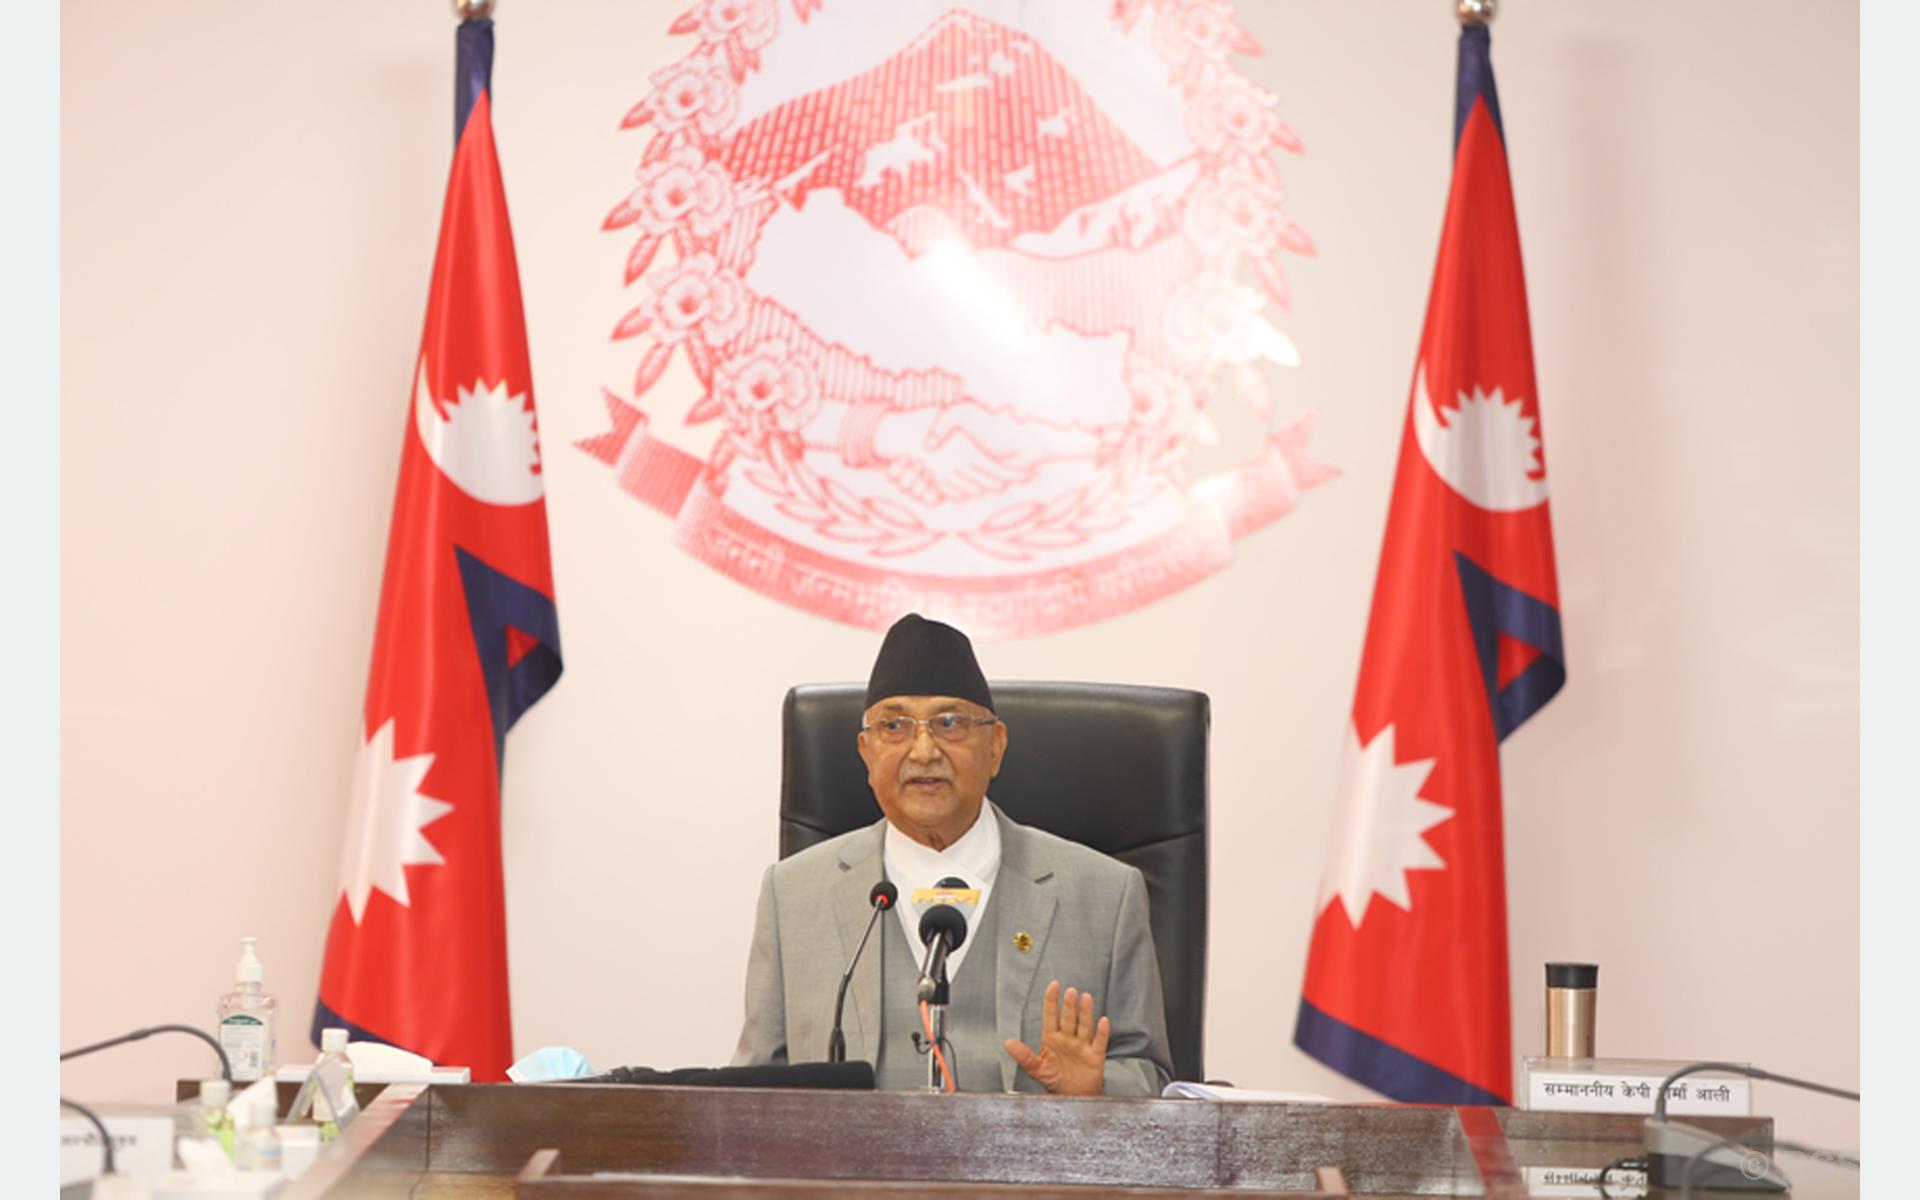 Government’s primary duty is to protect people’s life: PM Oli